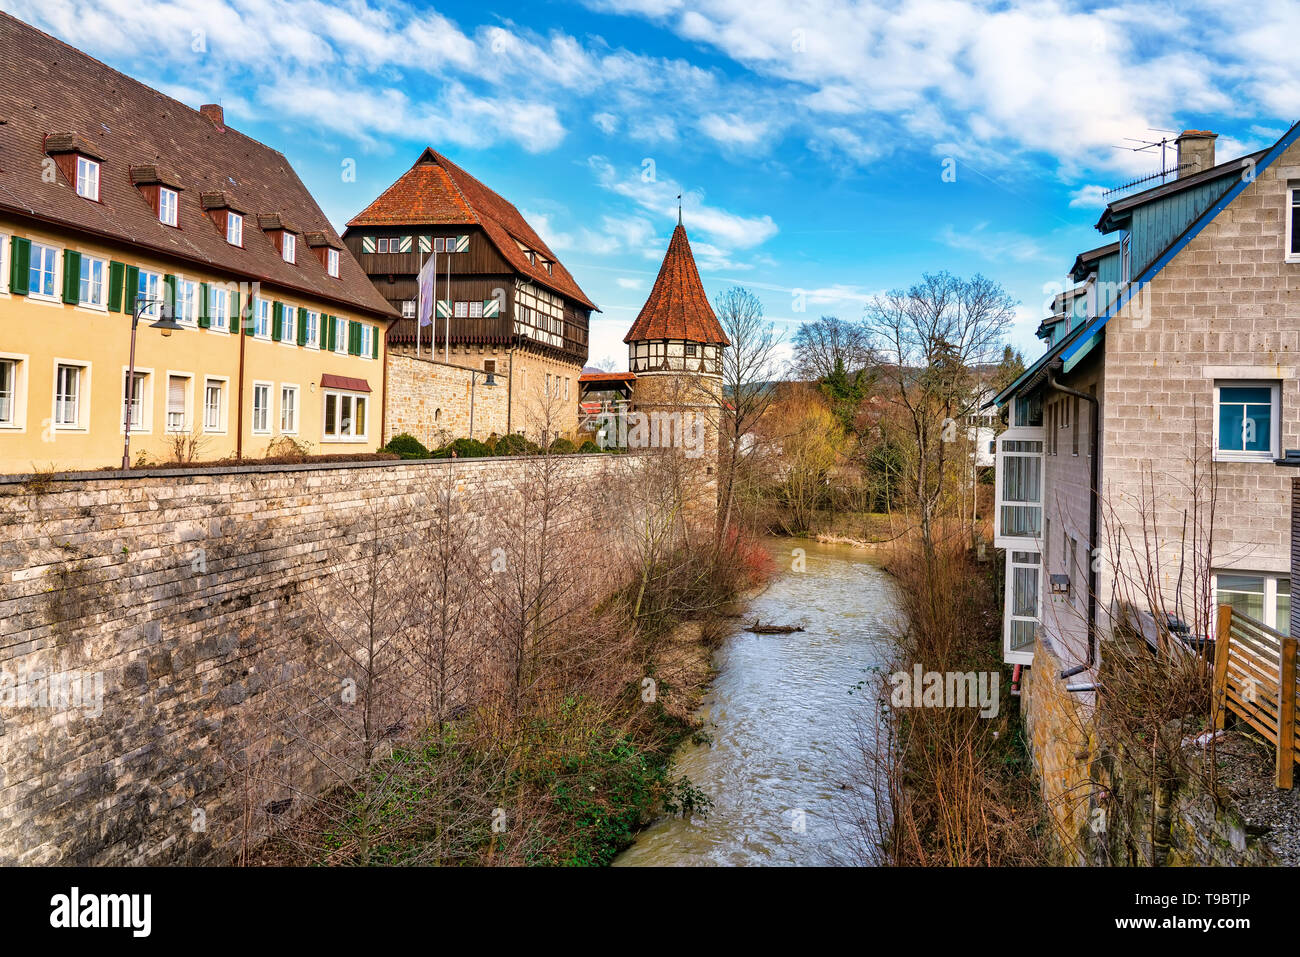 Balingen, Germany, the landmark of the city is the Zollernschloss. Adjacent to it is the former tanner quarter, also known as 'Little Venice'. Stock Photo